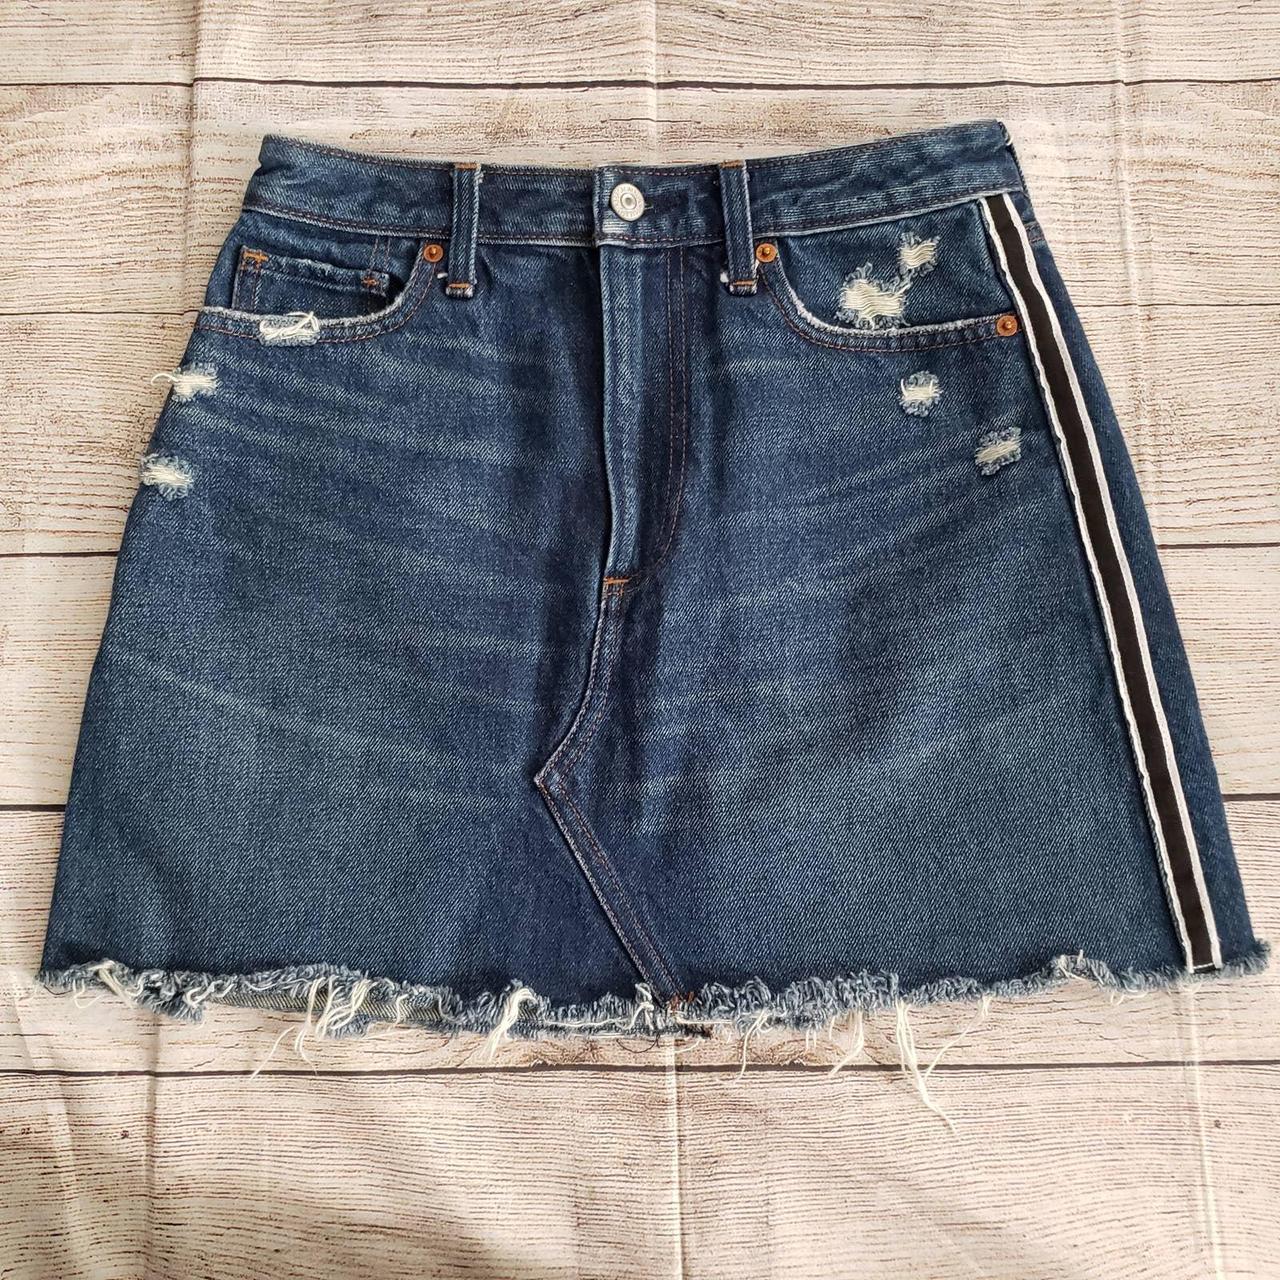 Abercrombie & Fitch Women's Blue Skirt